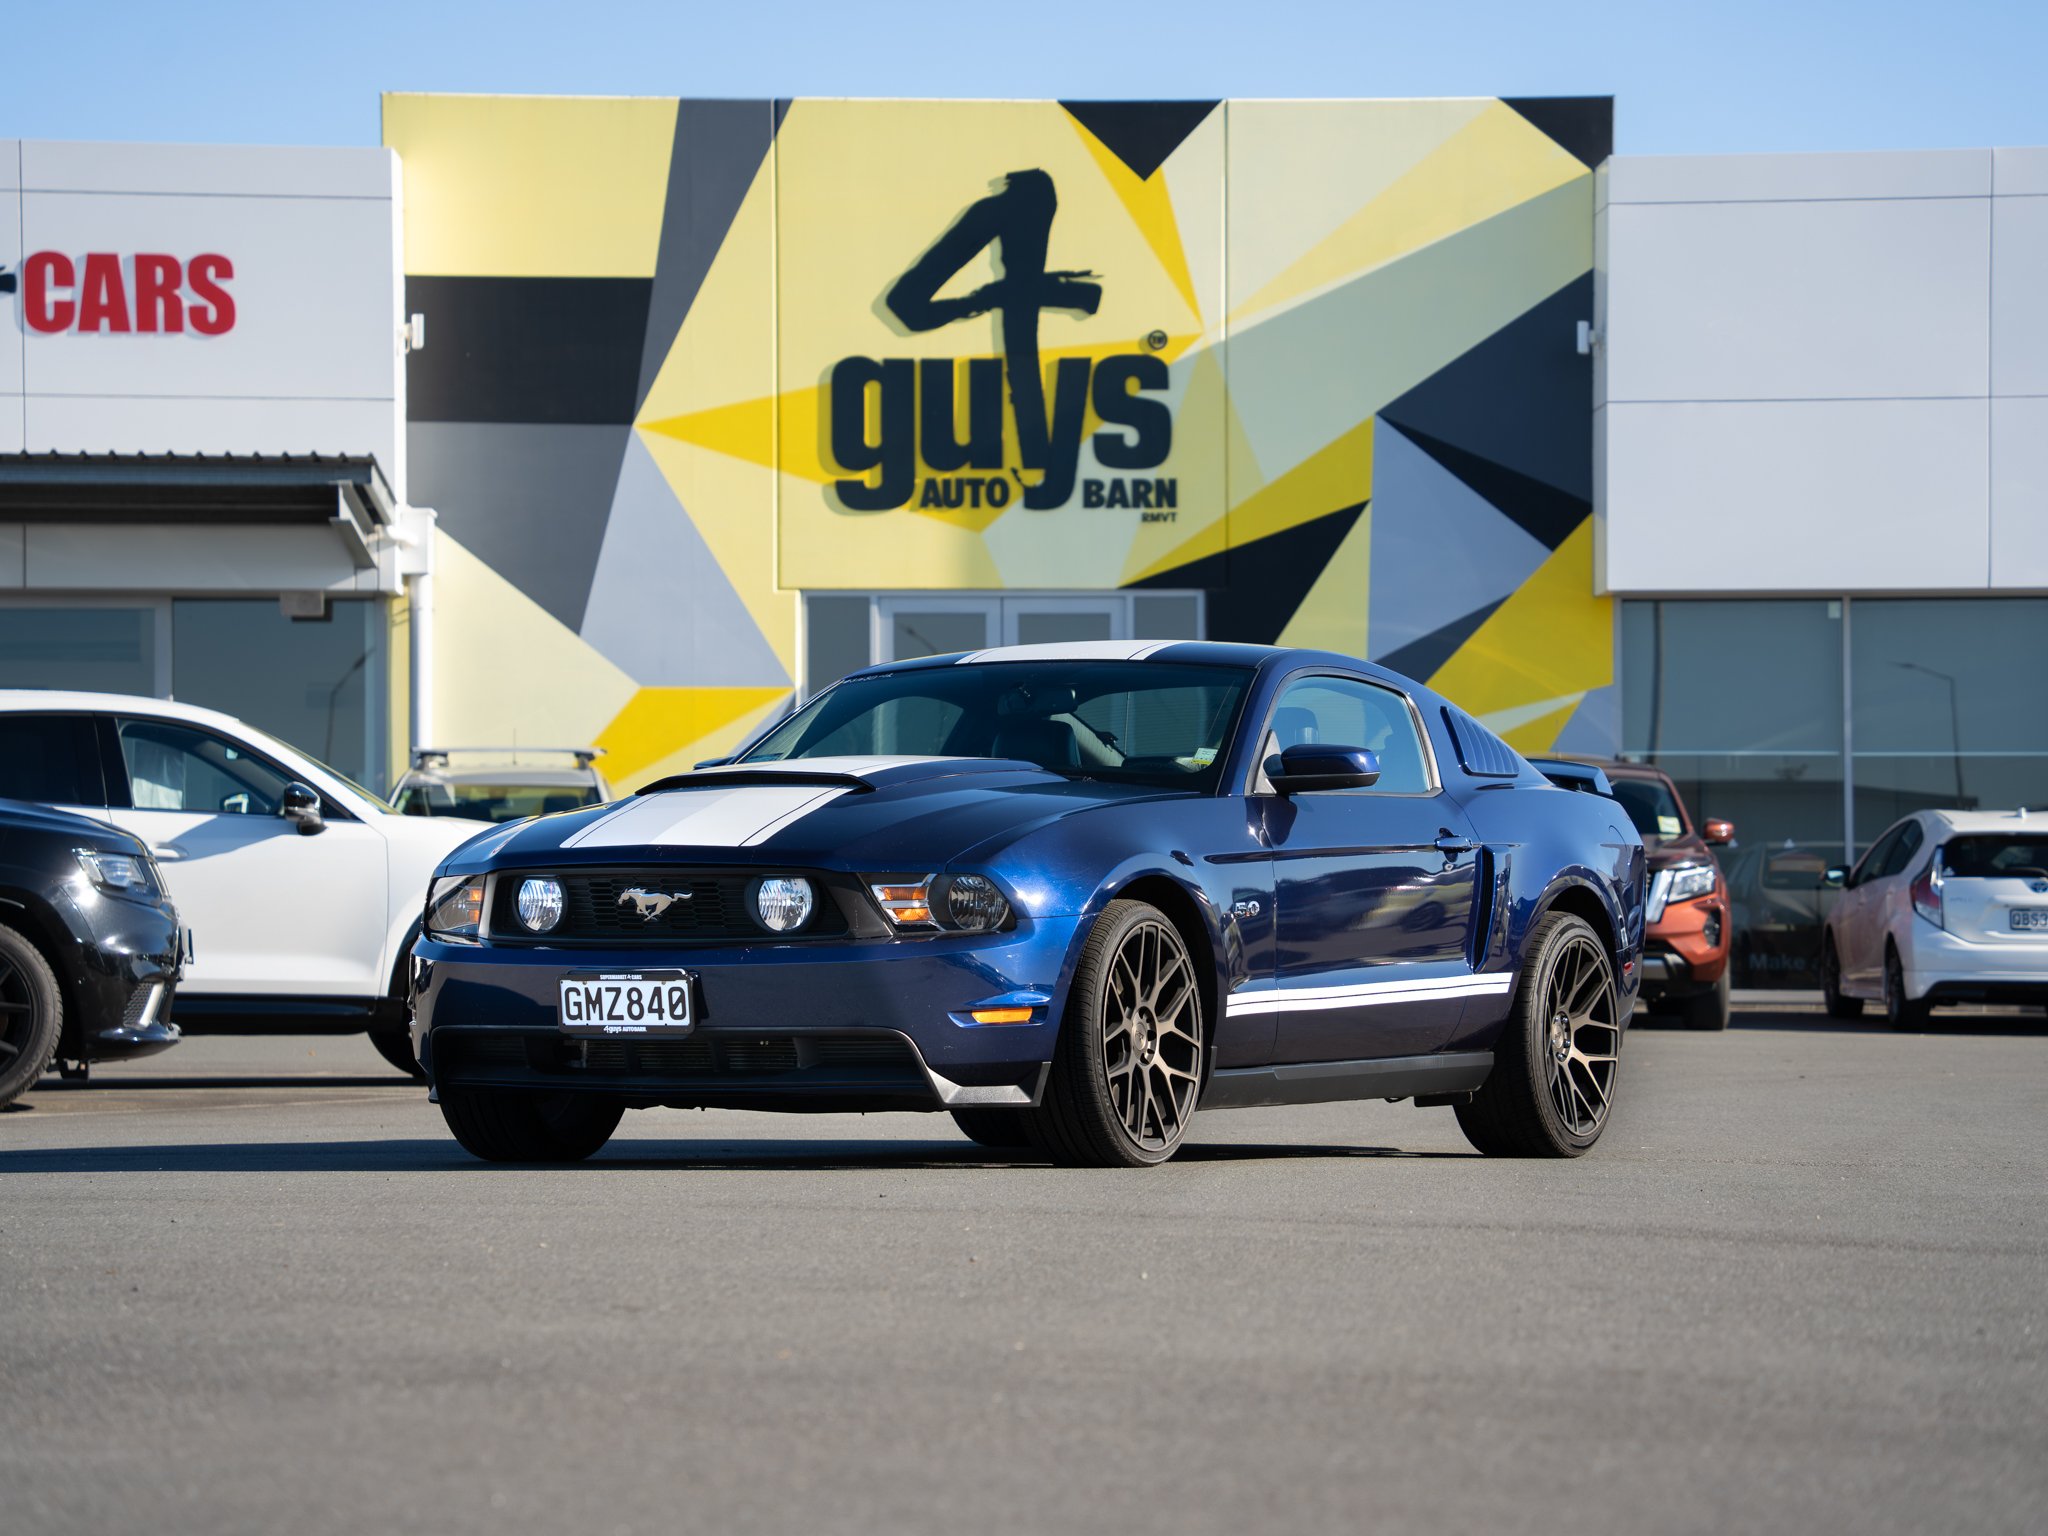 🔥JUST ARRIVED🔥 2012 Ford Mustang GT PREMIUM - $51,800nzd

This pristine 2012 Ford Mustang GT PREMIUM with only 36,640km is on sale for $51,800. Unleash the thrill of driving a classic powerhouse &ndash; first come, first serve! 🏁

#4Guys #NewZeala